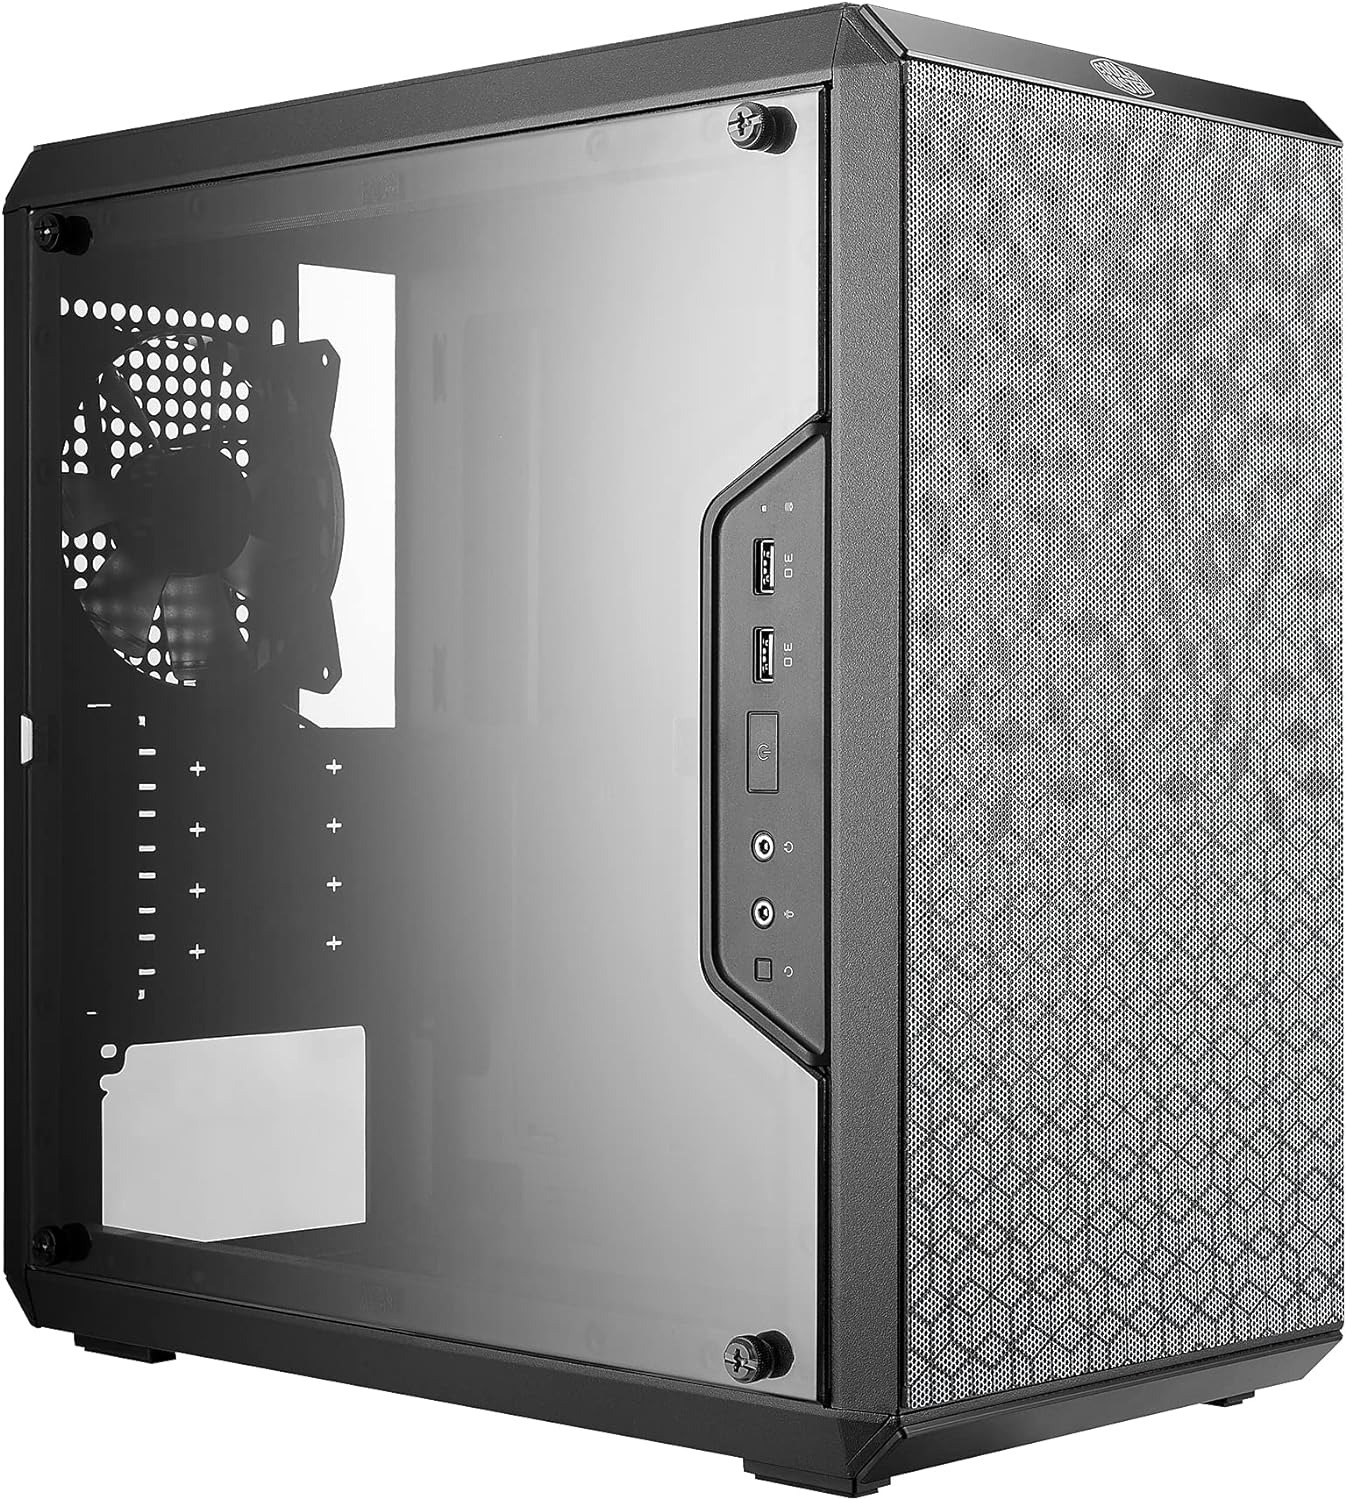 Cooler Master Masterbox Q300L Micro-Atx Tower with Magnetic Design Dust Filter,